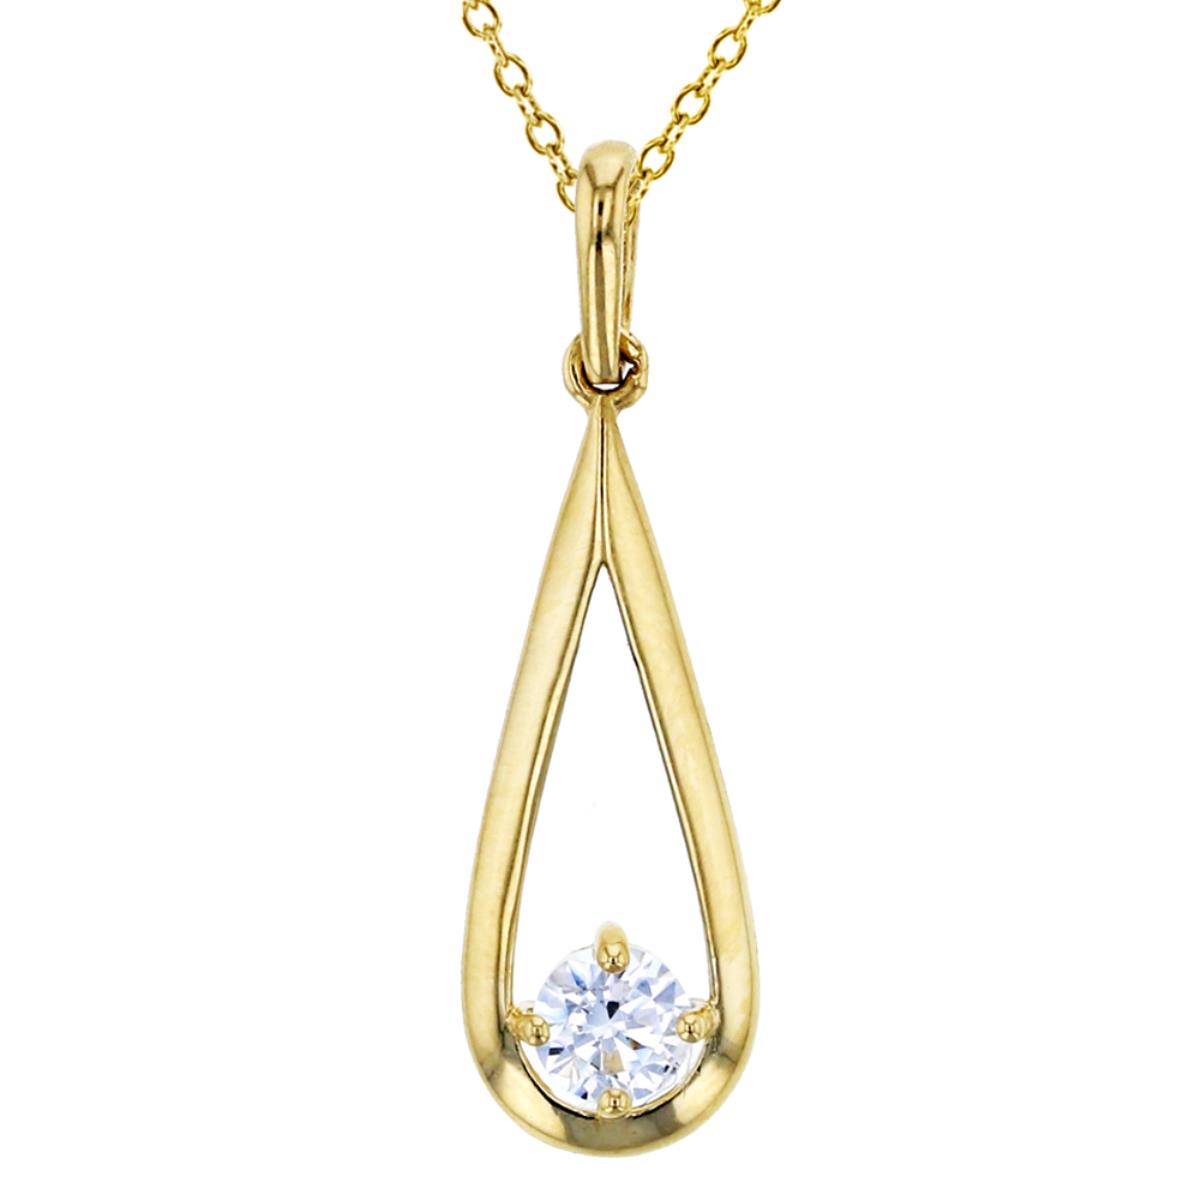 10K Yellow Gold Polished Tear Drop 3.50mm CZ Dangling 18" Necklace